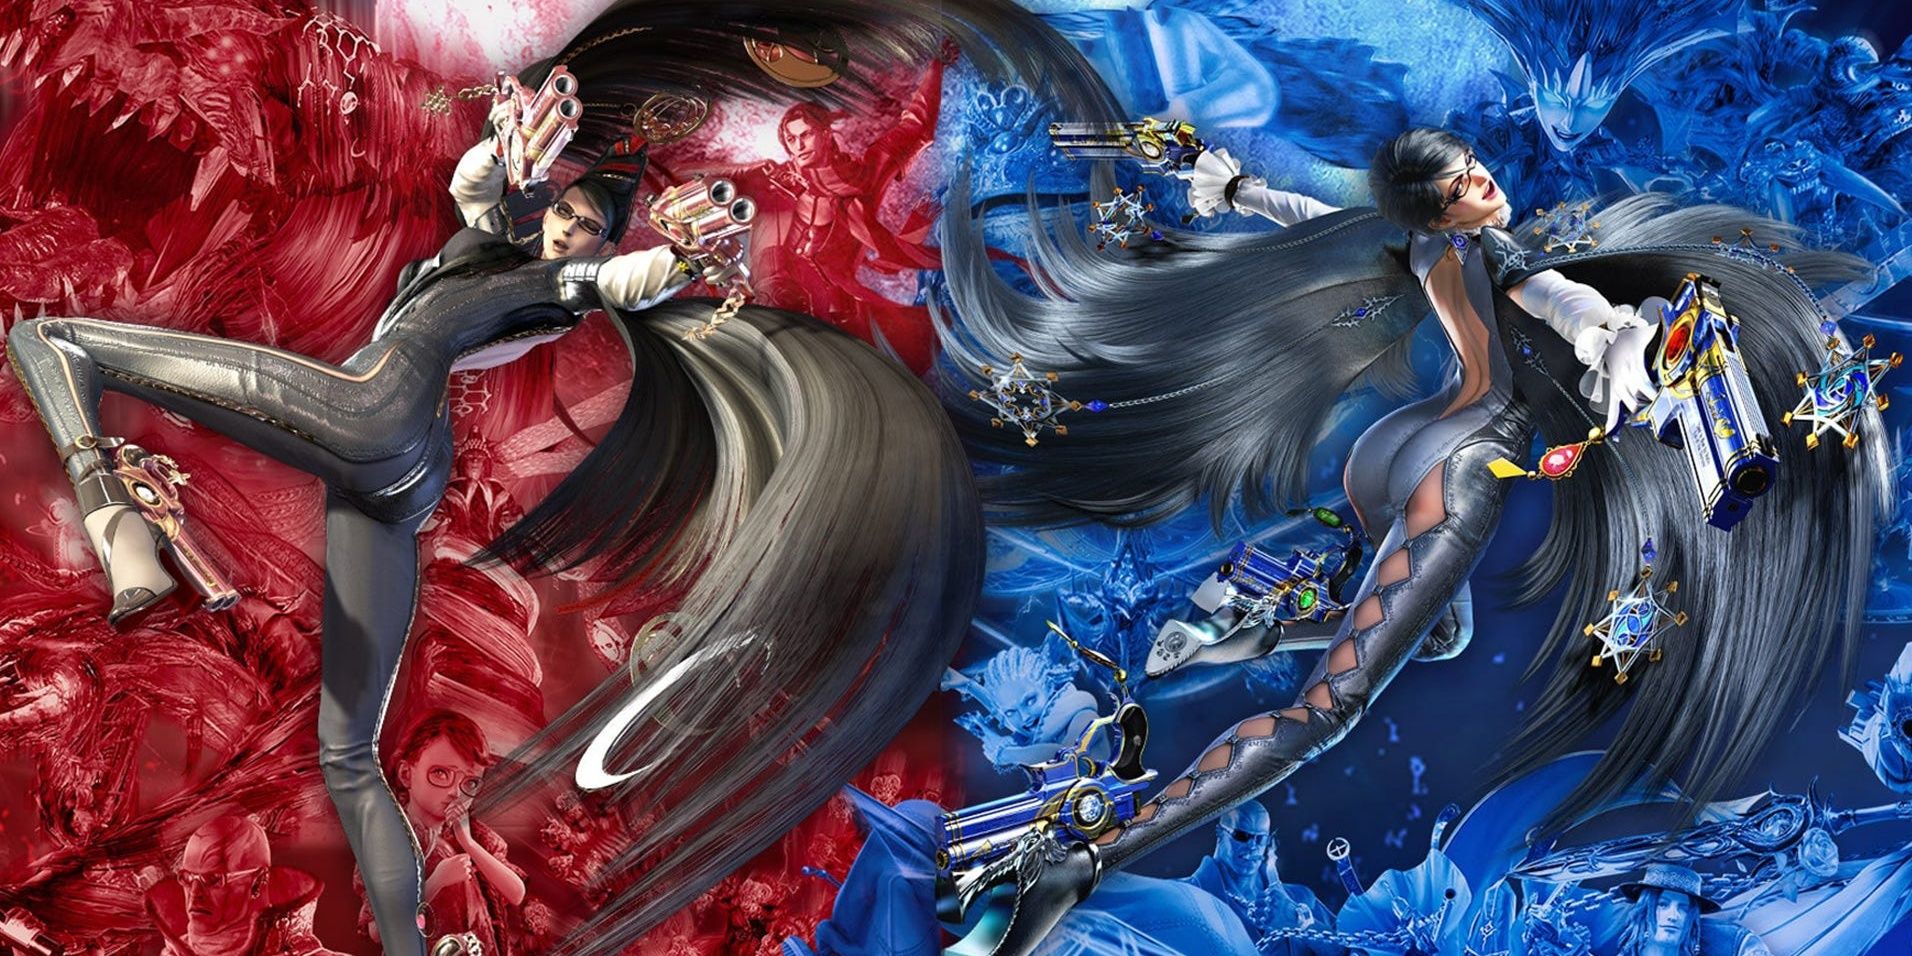 Bayonetta 3: Everything You Need To Know Before Playing